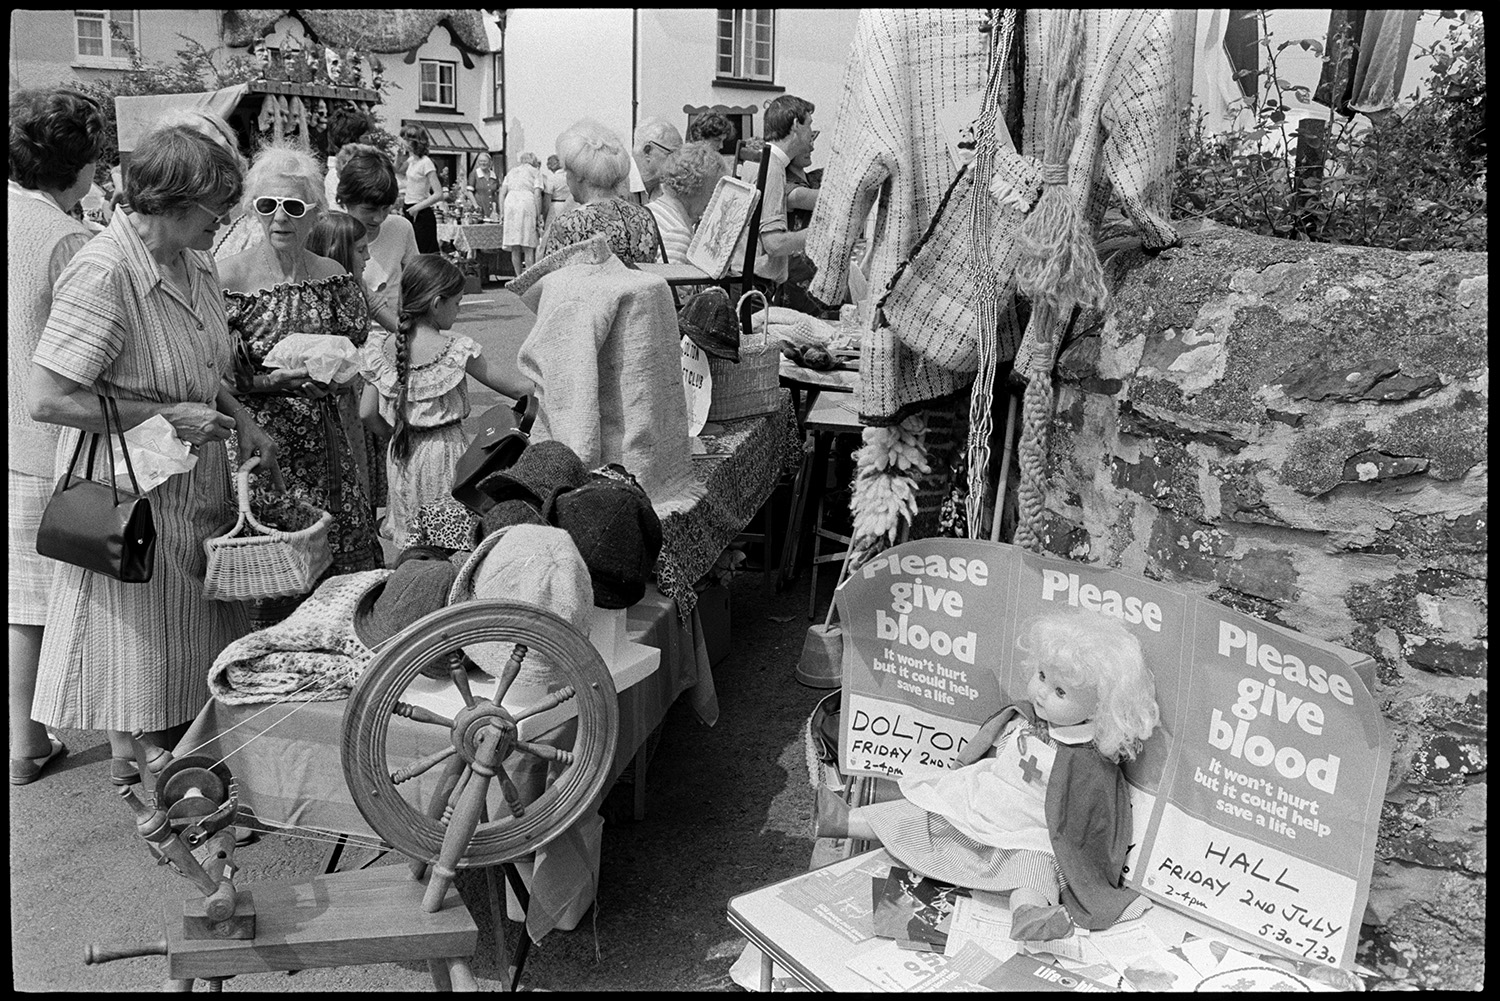 Open air market, village square part of festival, stalls, flags, crafts, books, plants. 
[Women and children looking at a stall with clothes and hats at Dolton Festival or open air market. A spinning wheel is next to stall along with posters asking people to give blood.]